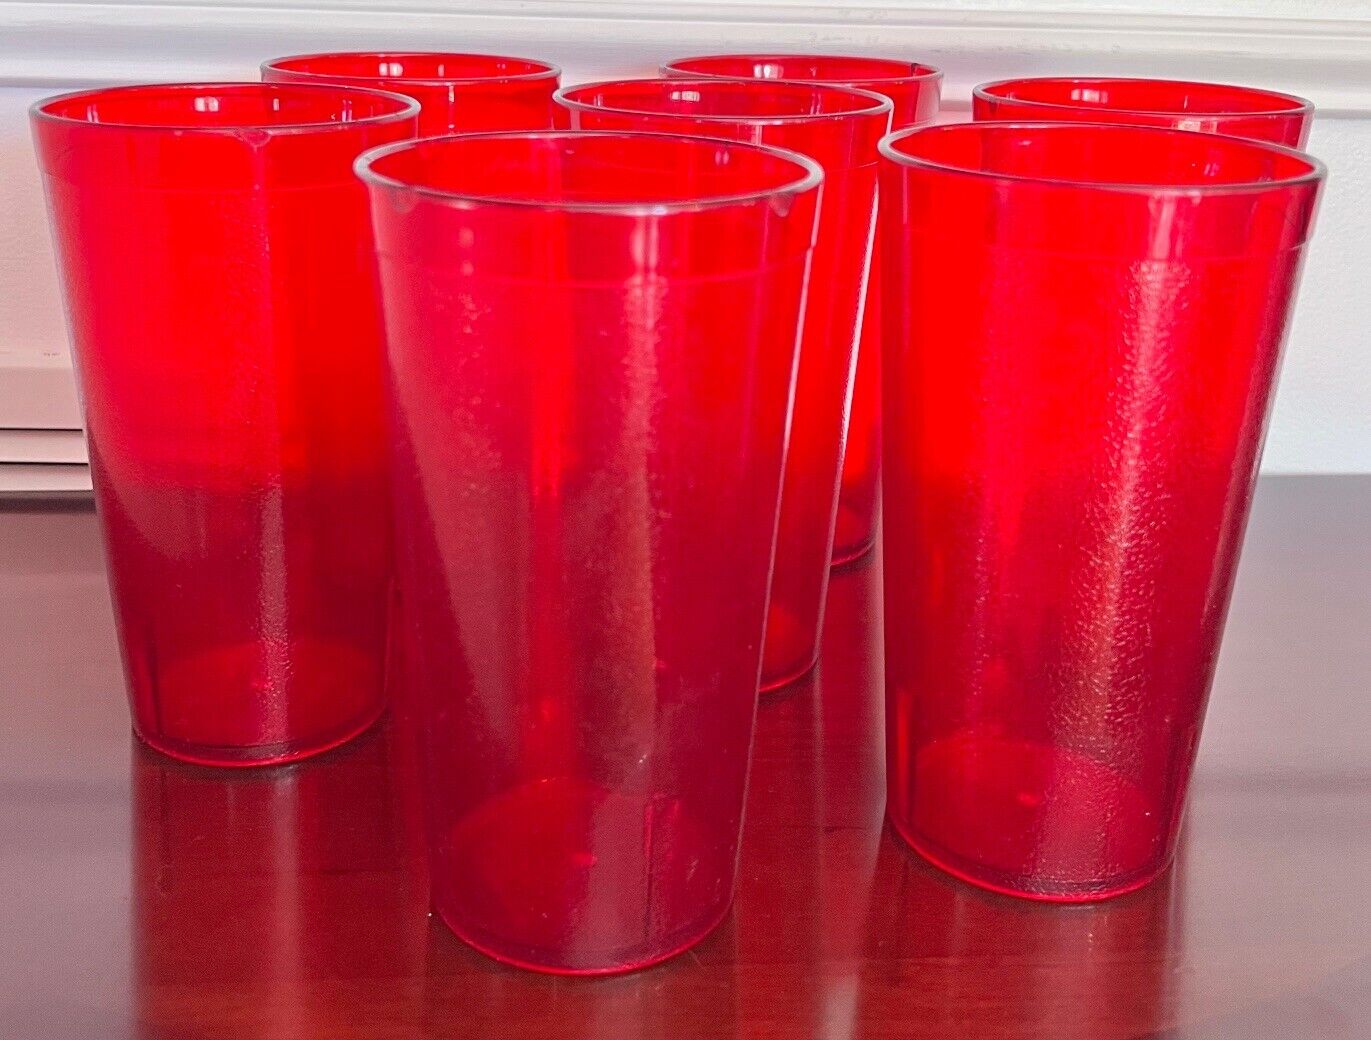 12 Oz Red Plastic Drink Beverage Cups Set of 7 Vintage Pizza Hut Style HAS CHIPS